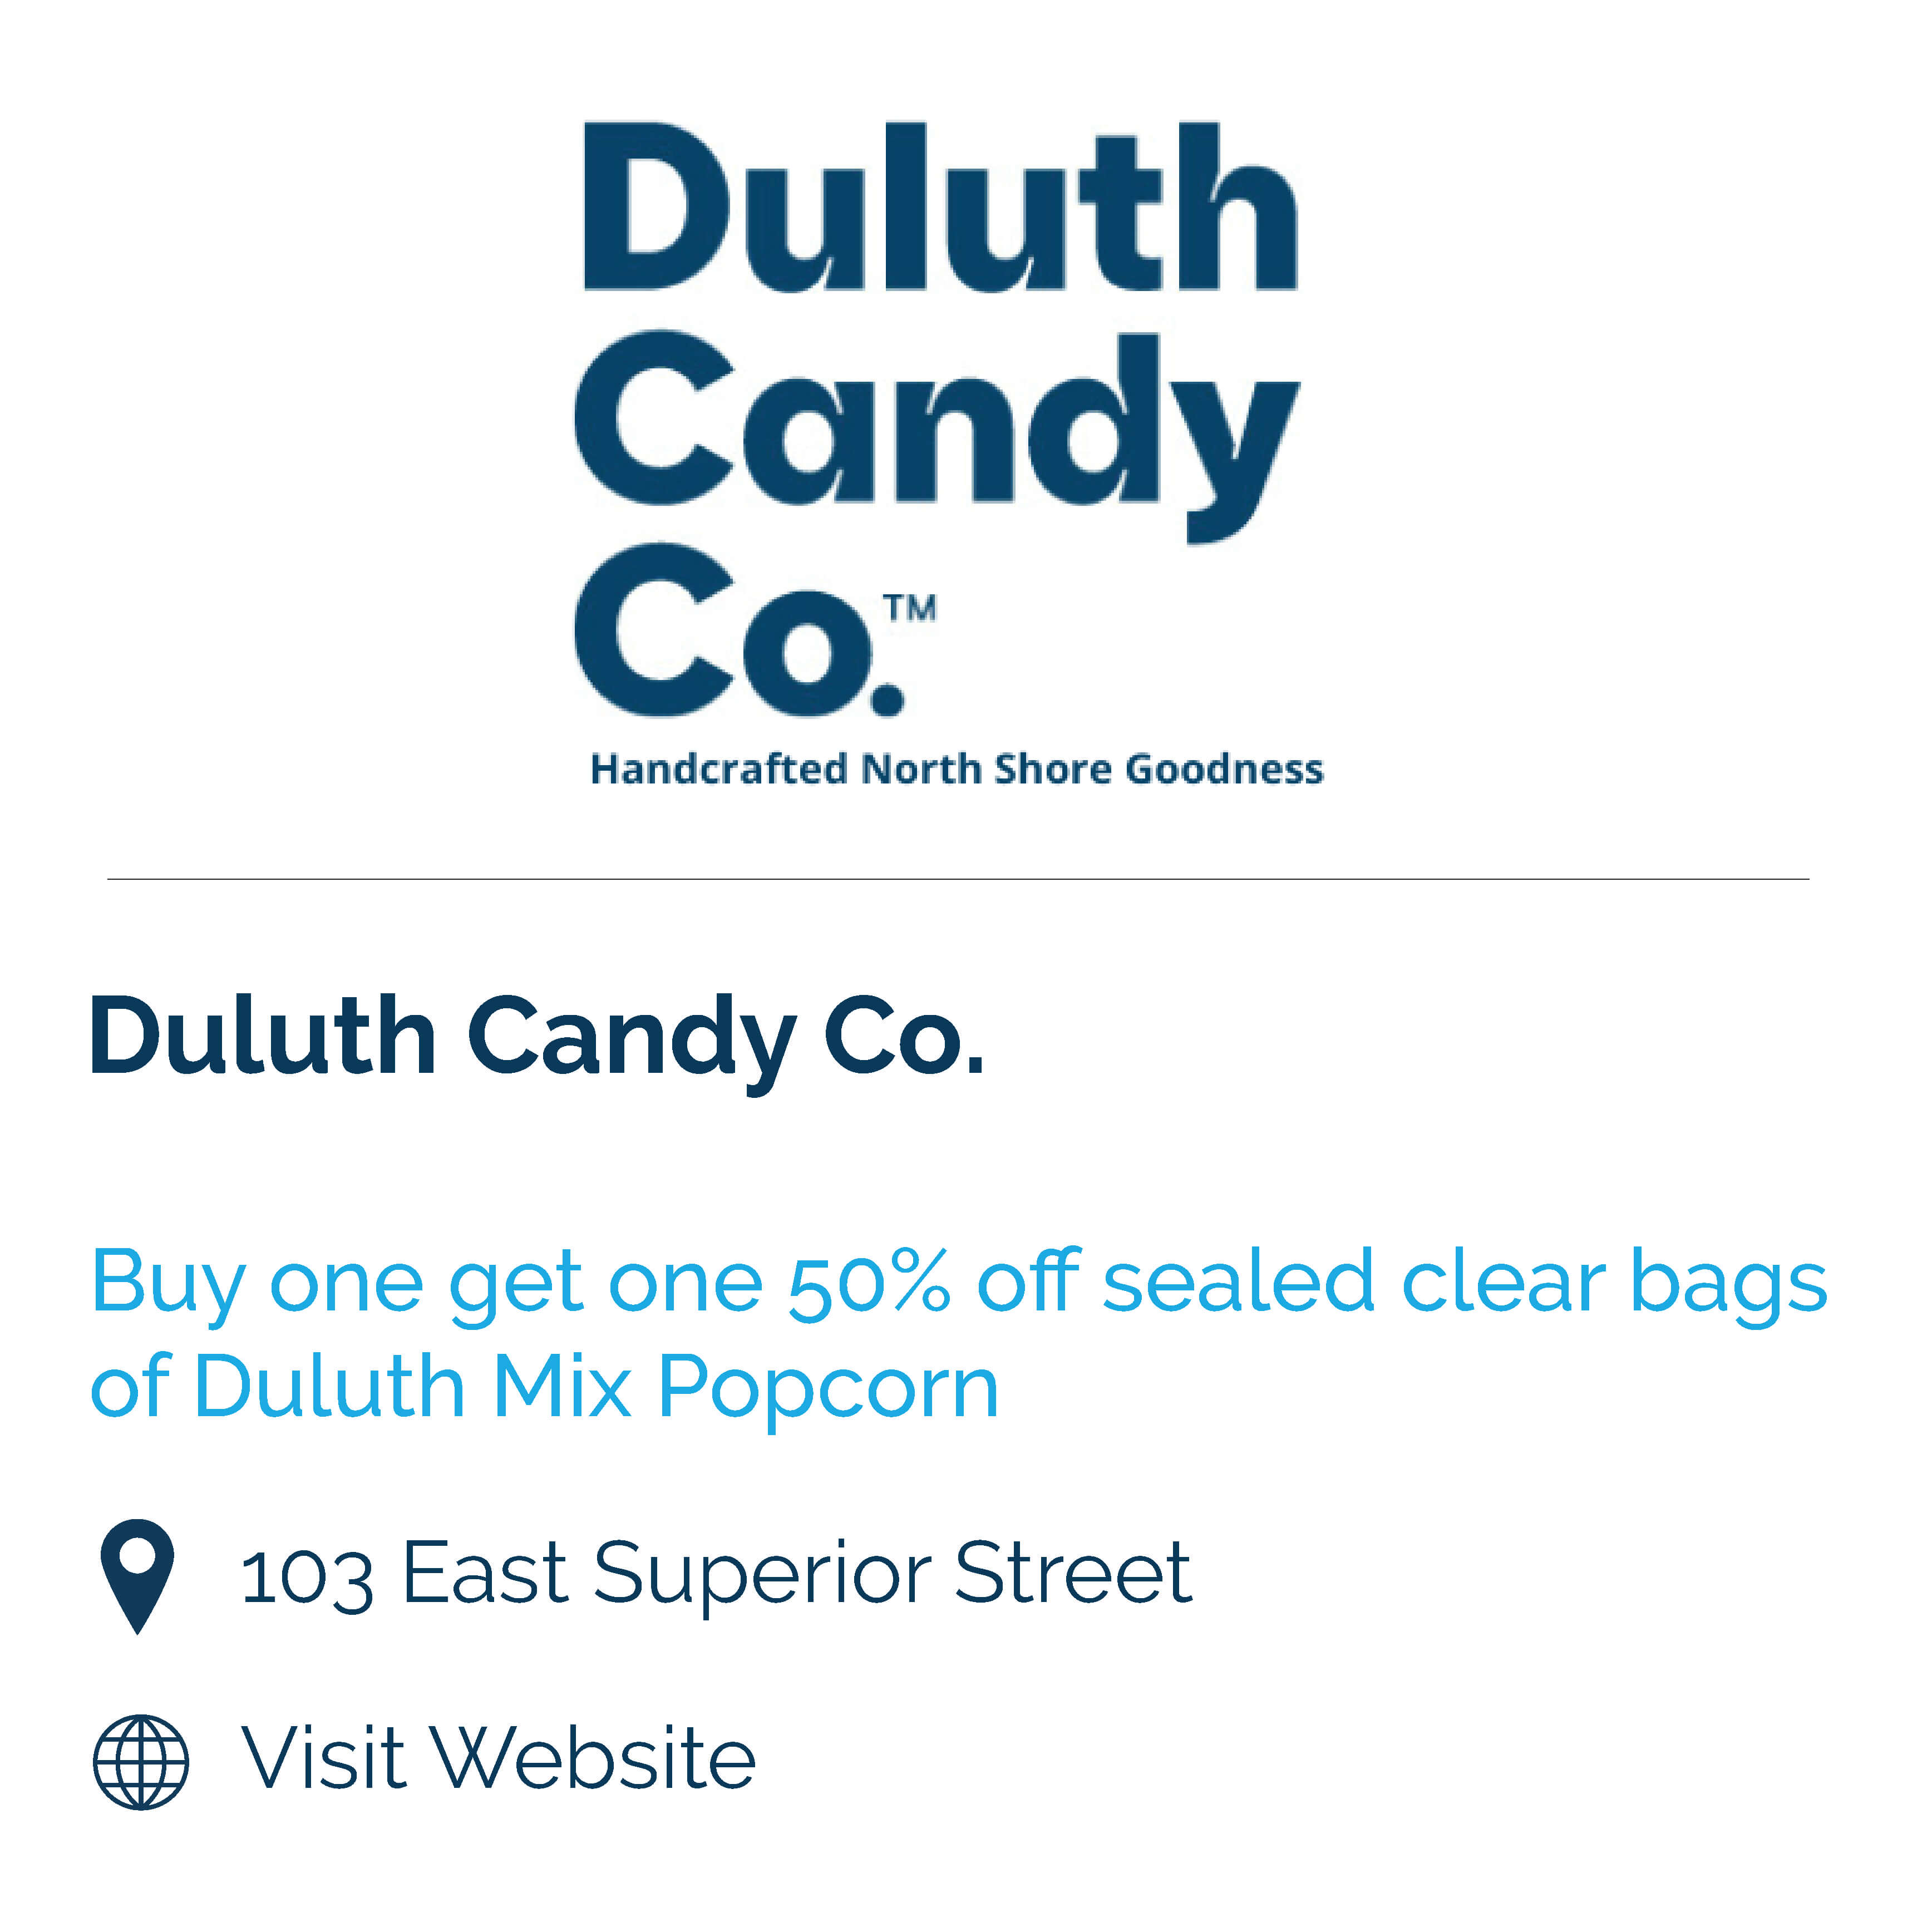 duluth candy co. buy one get one 50% off sealed clear bags of duluth mix popcorn. 103 east superior street